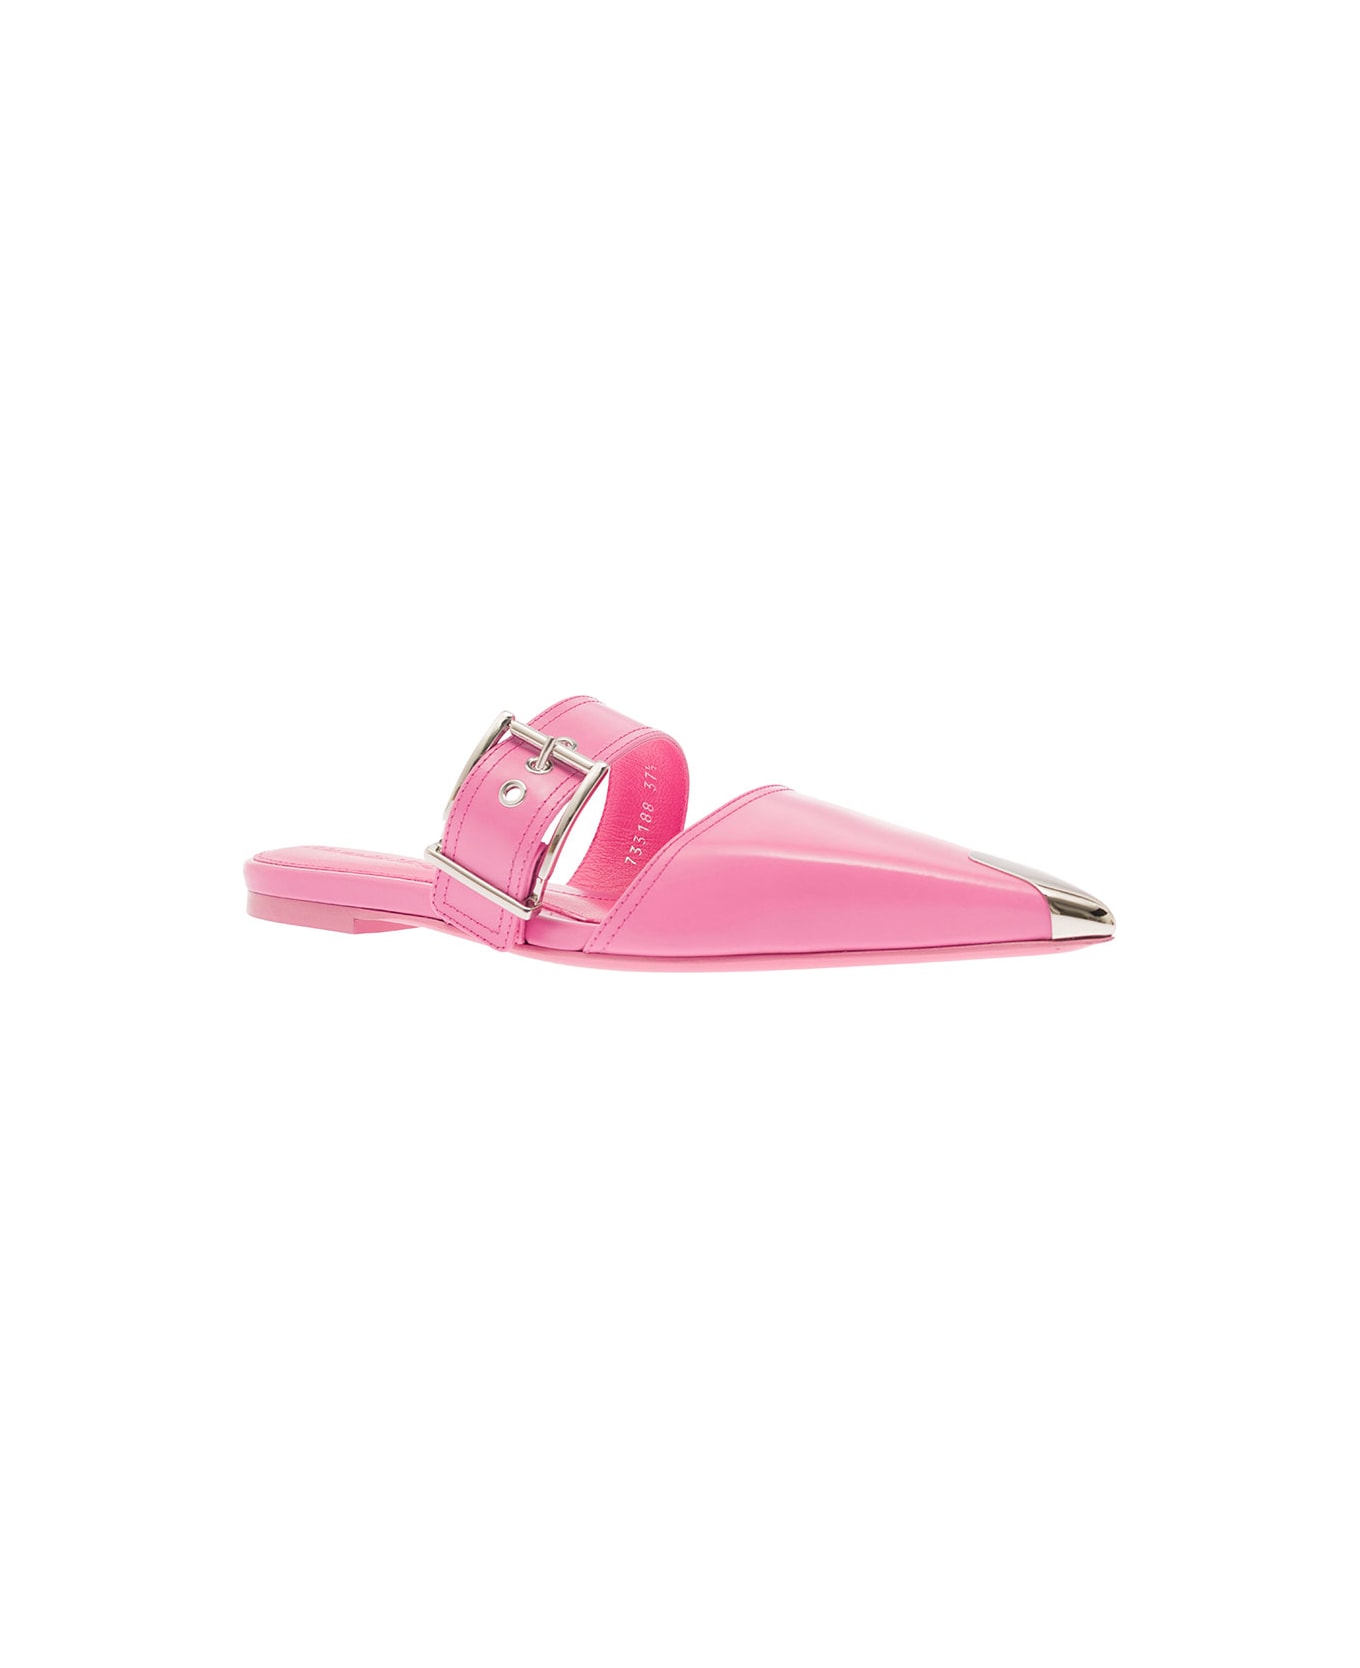 Alexander McQueen 'punk' Pink Mules With Metal Tip In Leather Woman - Pink サンダル